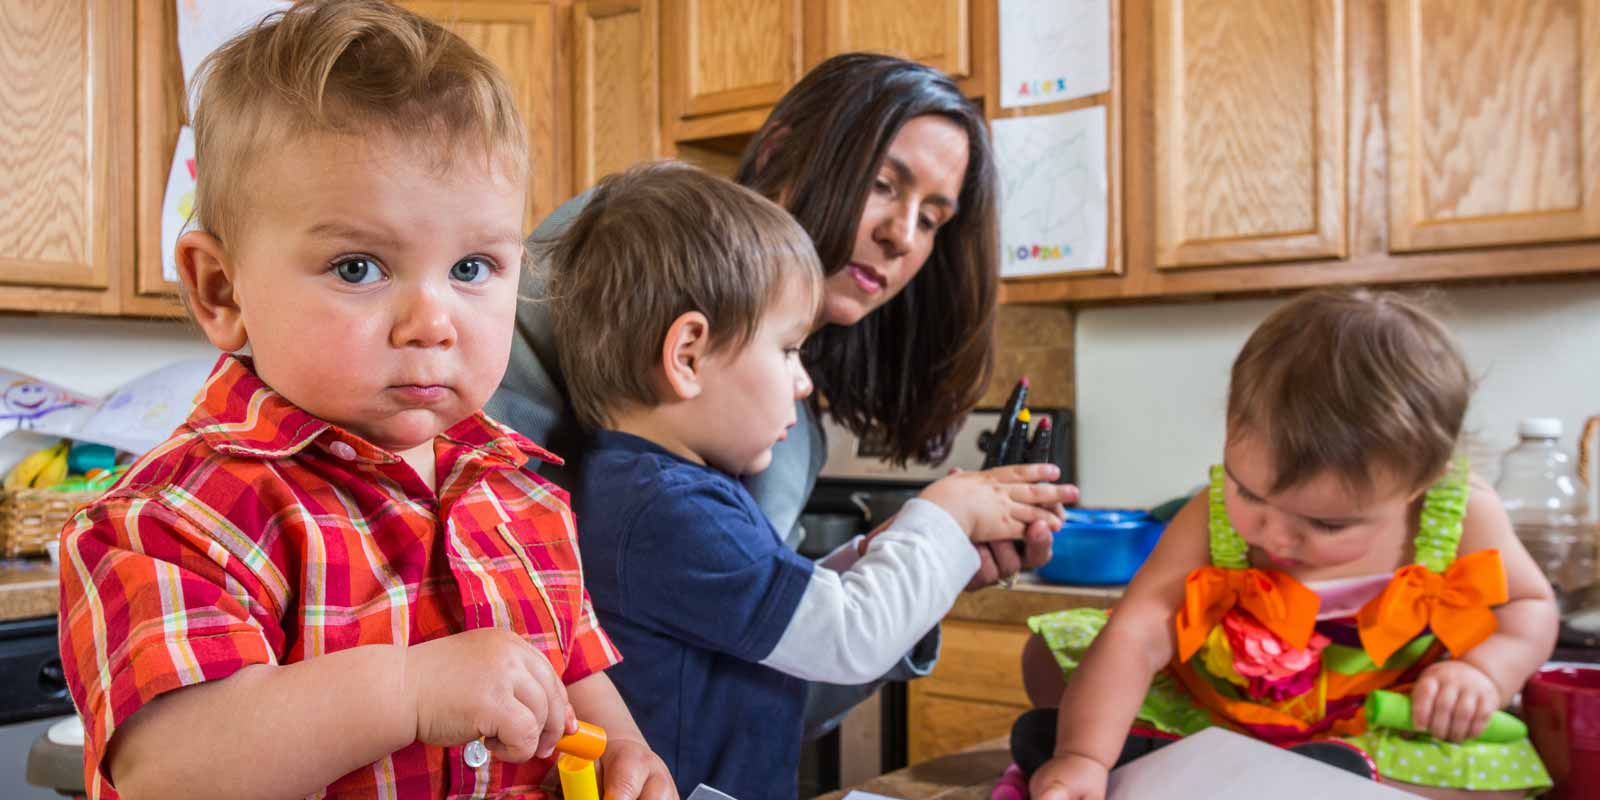 How Much Does Home Daycare Insurance Cost? | JMG Insurance Agency